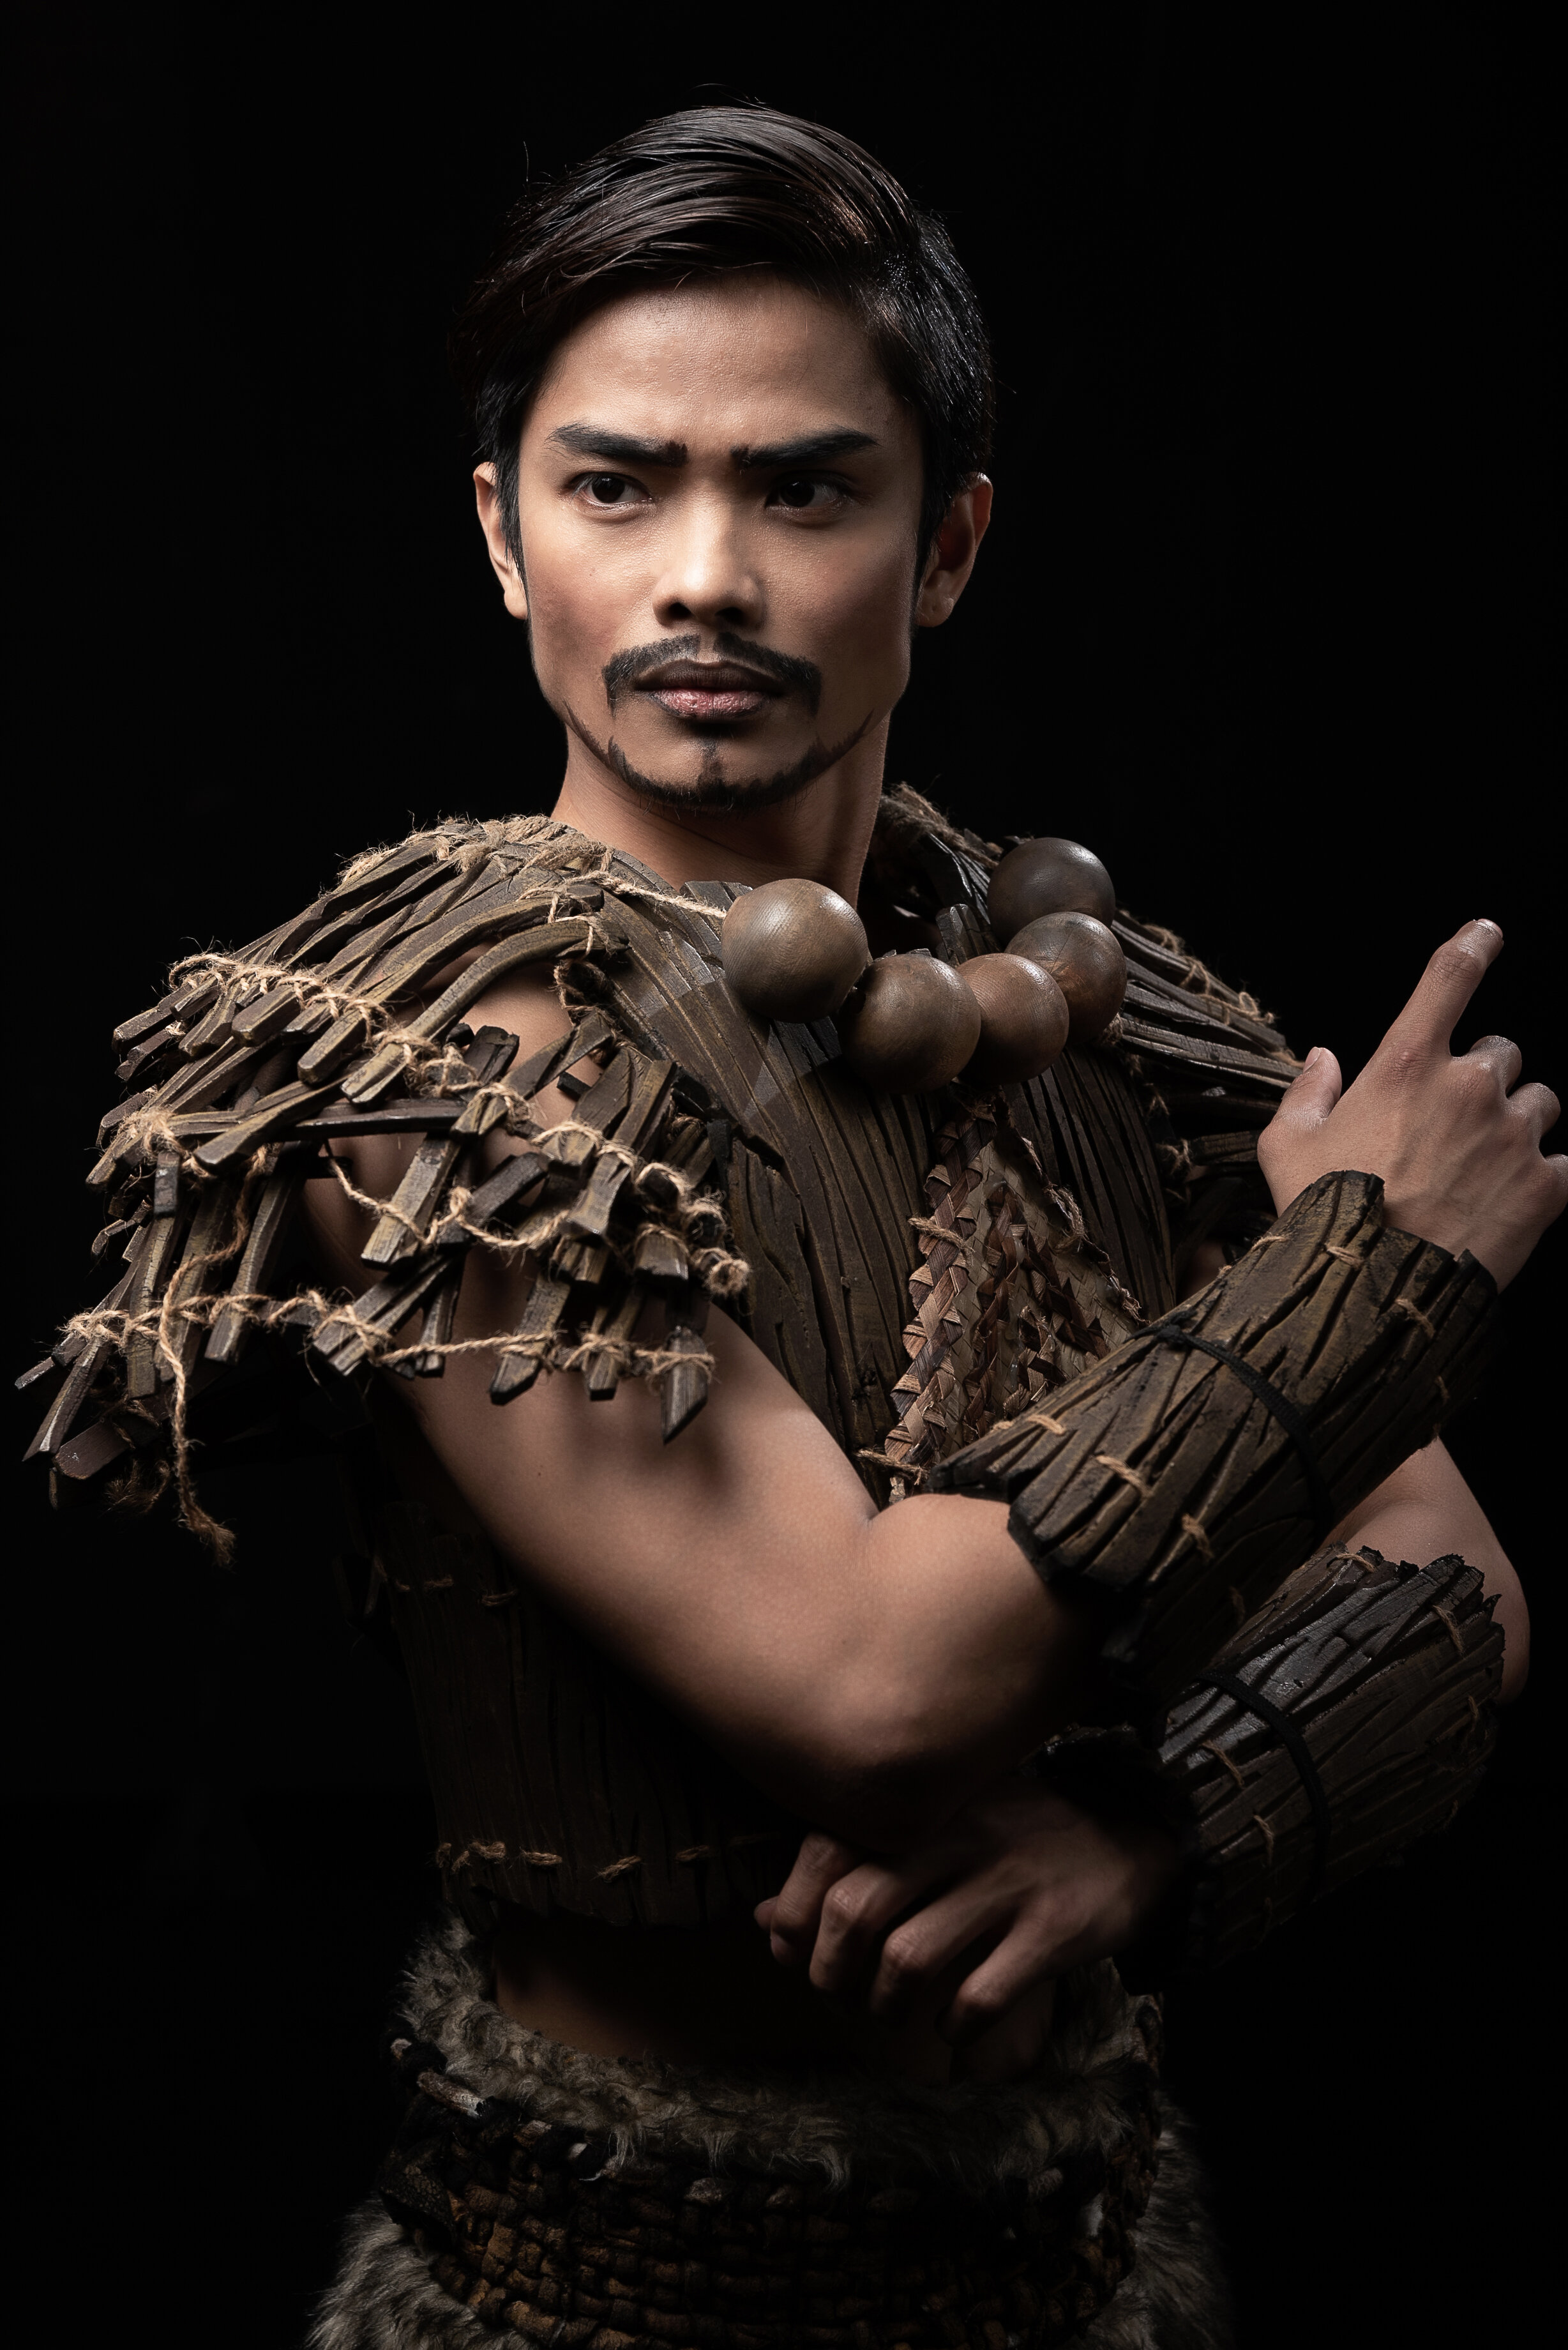  Prinsipe Pedro (Elpidio Magat) is the oldest among the three brothers and the first to go on the quest. Photo courtesy of MarBi Photography and Project Art, Inc. 